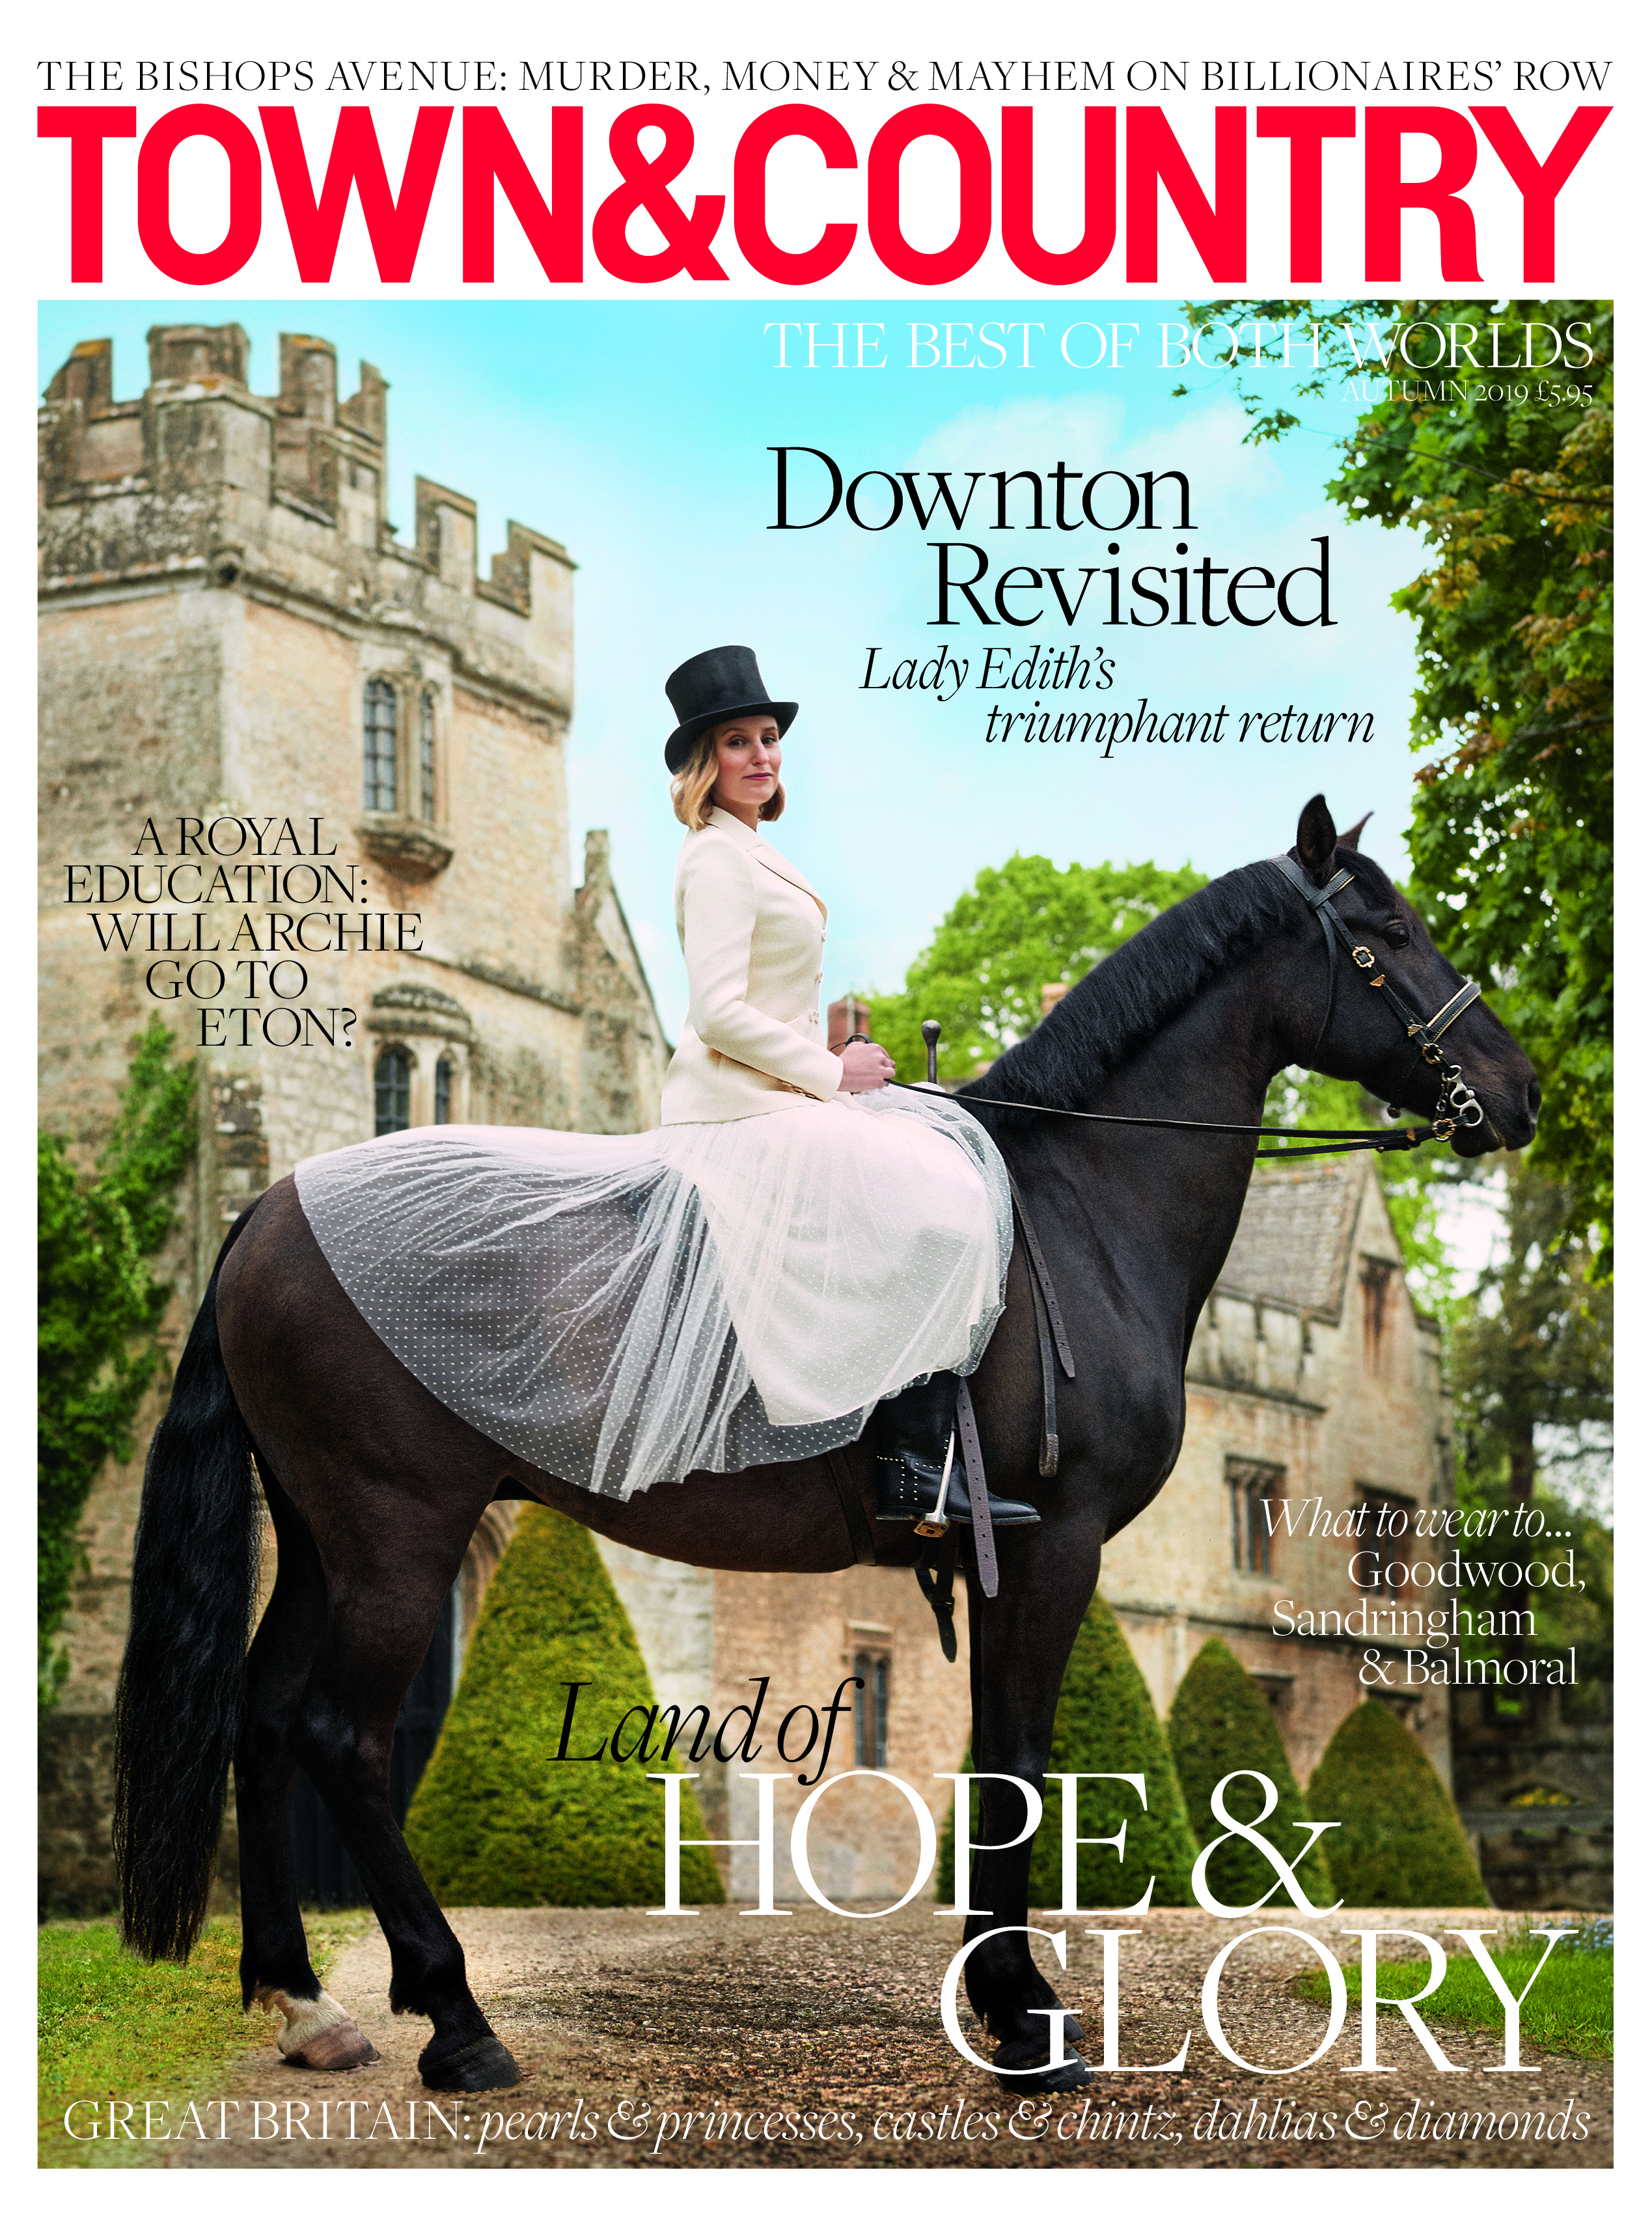 The cover of Town & Country magazine 